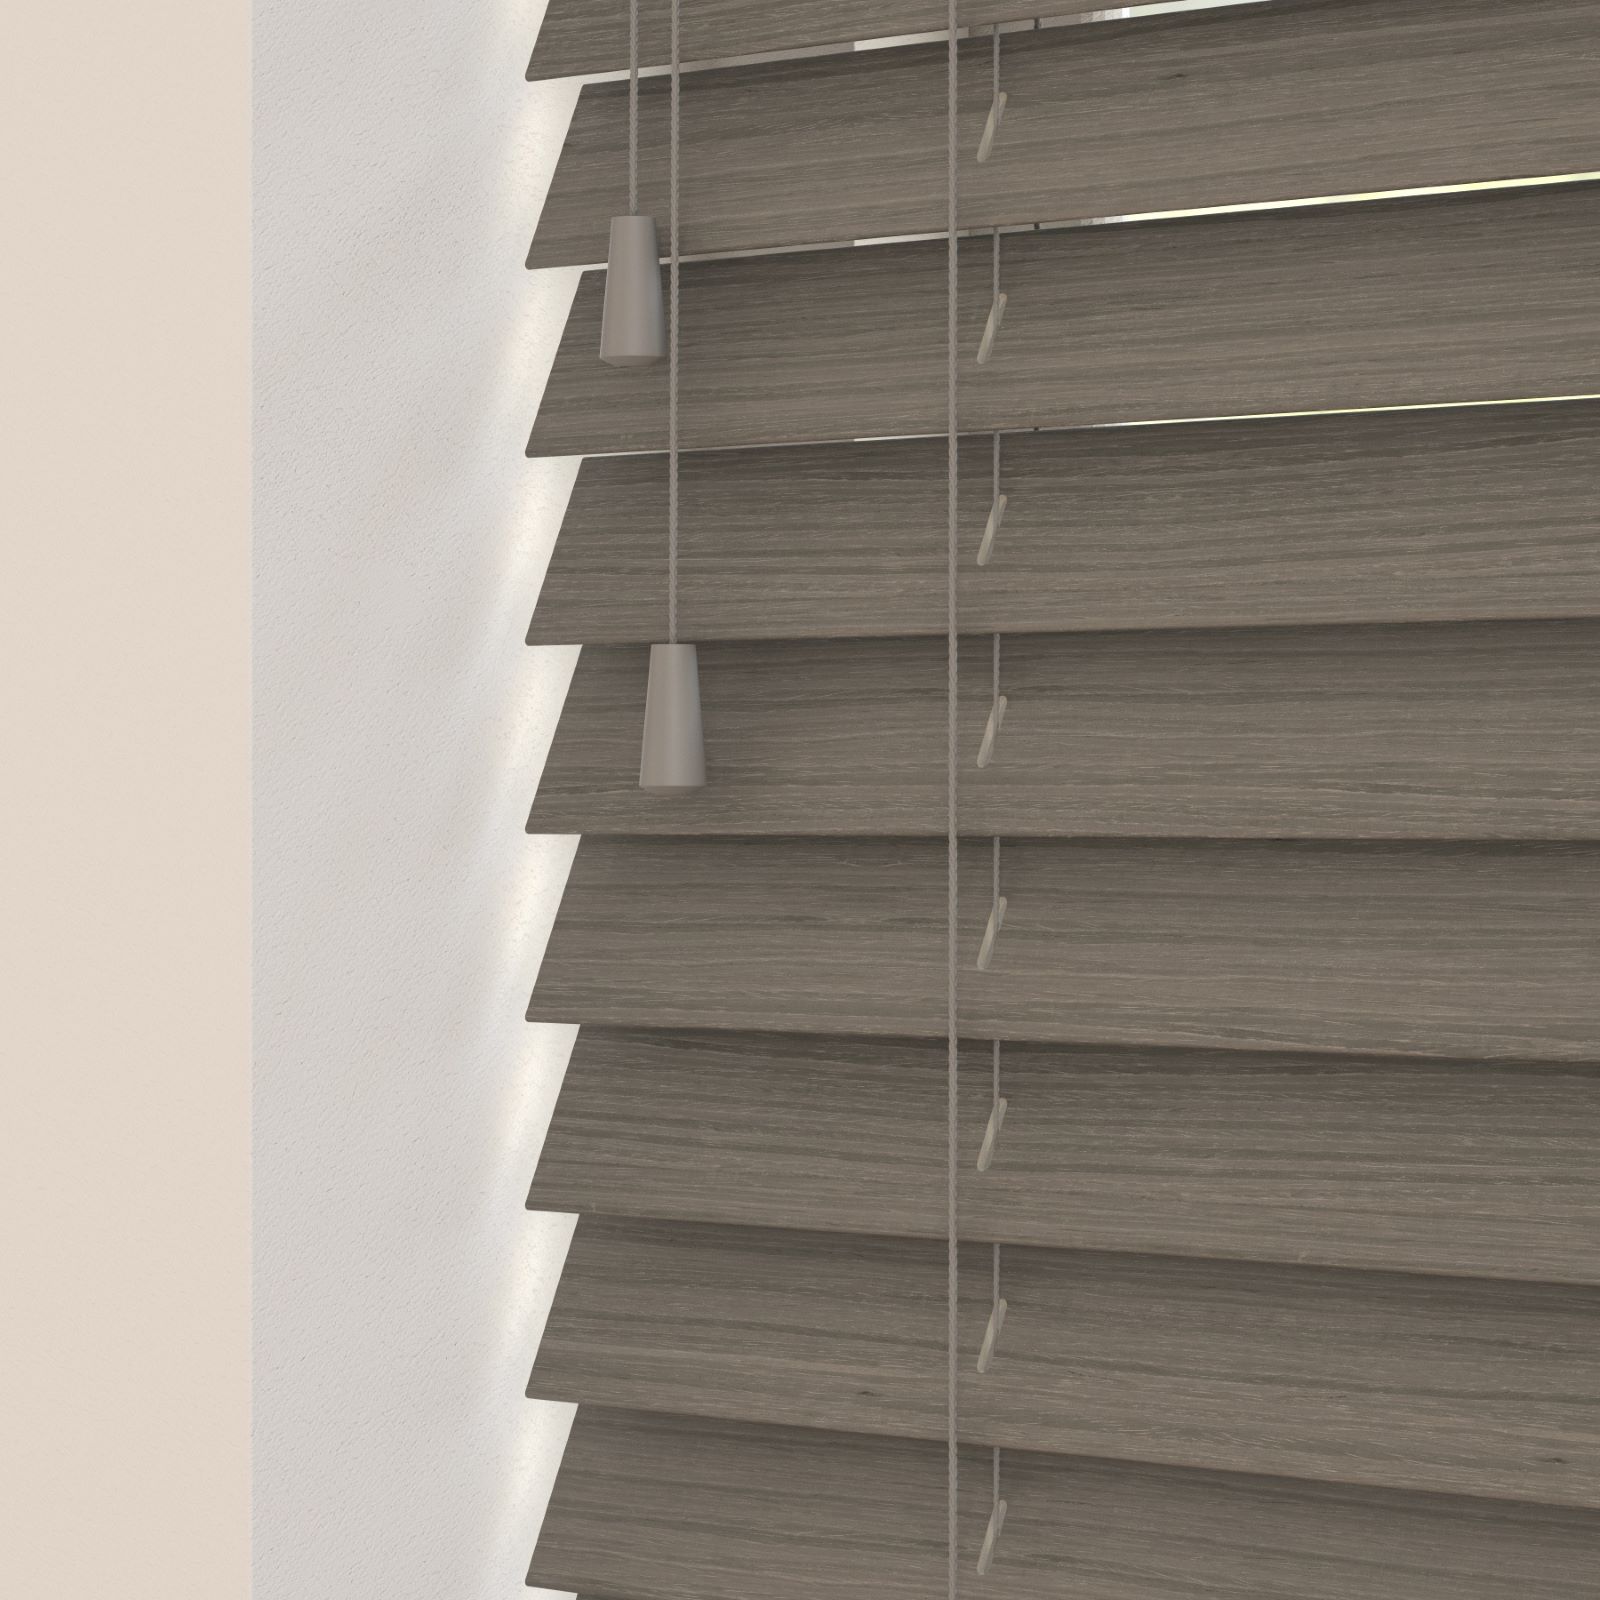 UK Suppliers of Stylish Venetian Blinds For Any Room